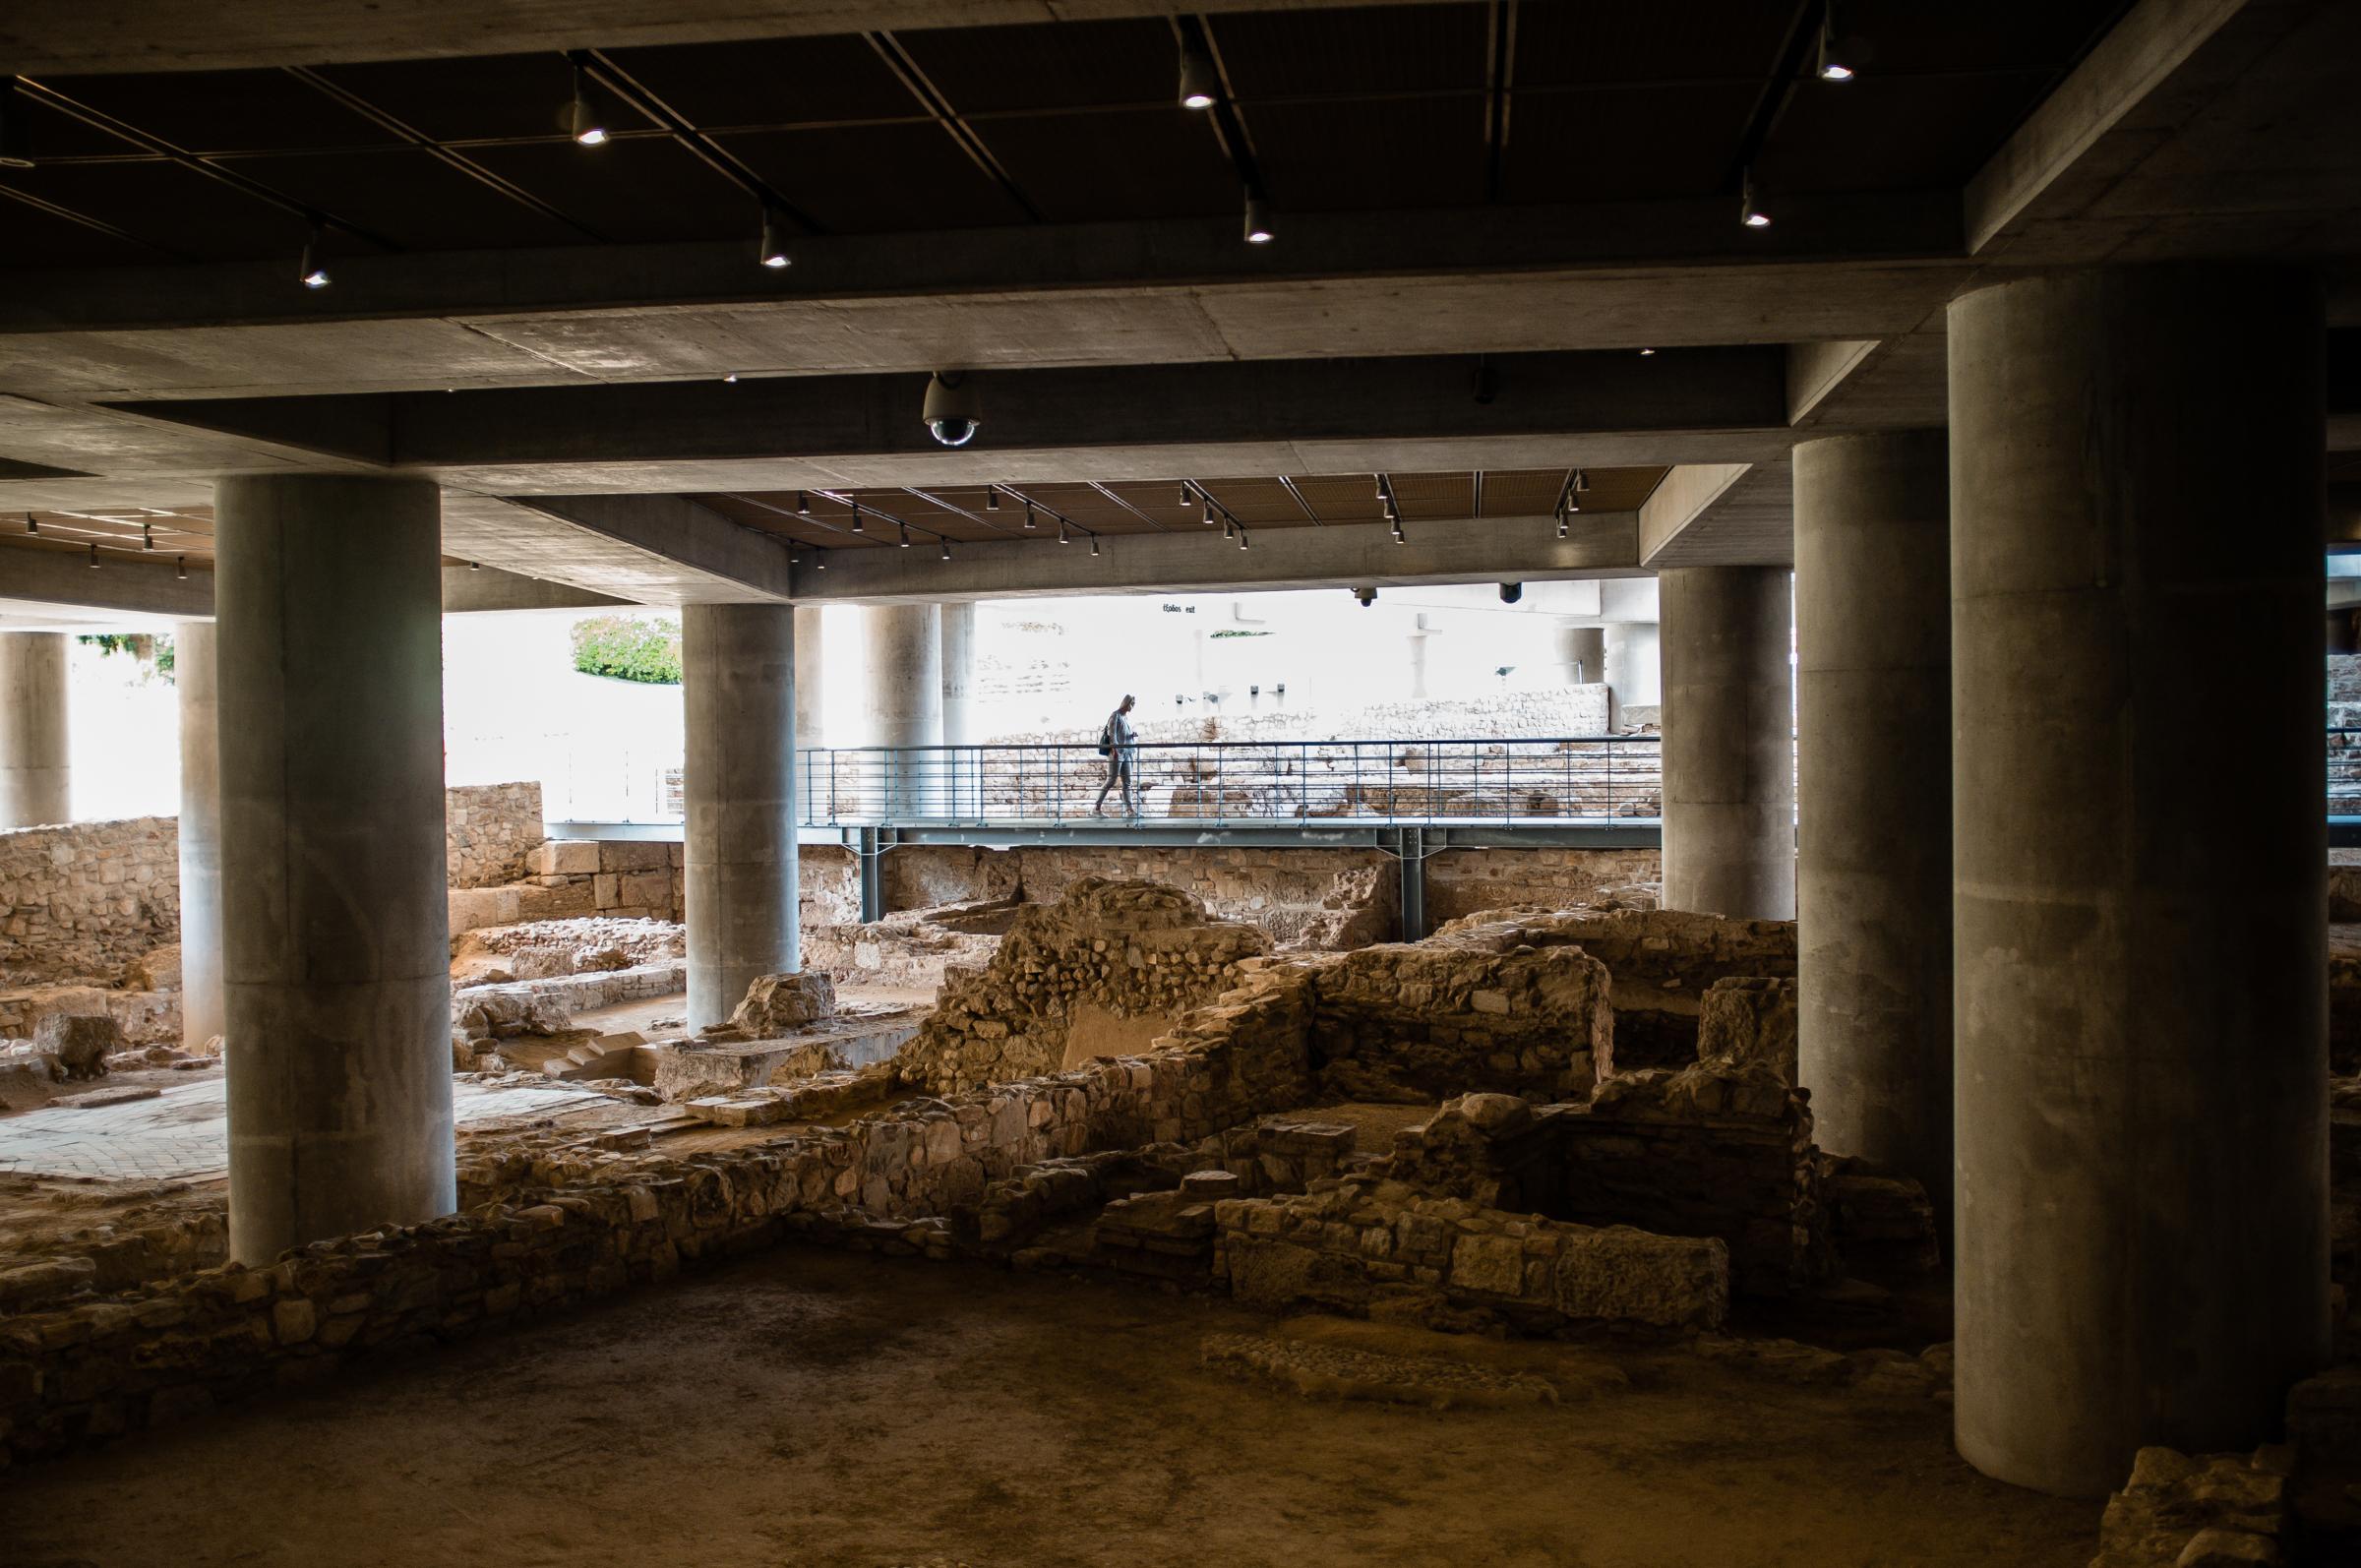 acropolis - Beneath the Acropolis museum are the ruins of an ancient...